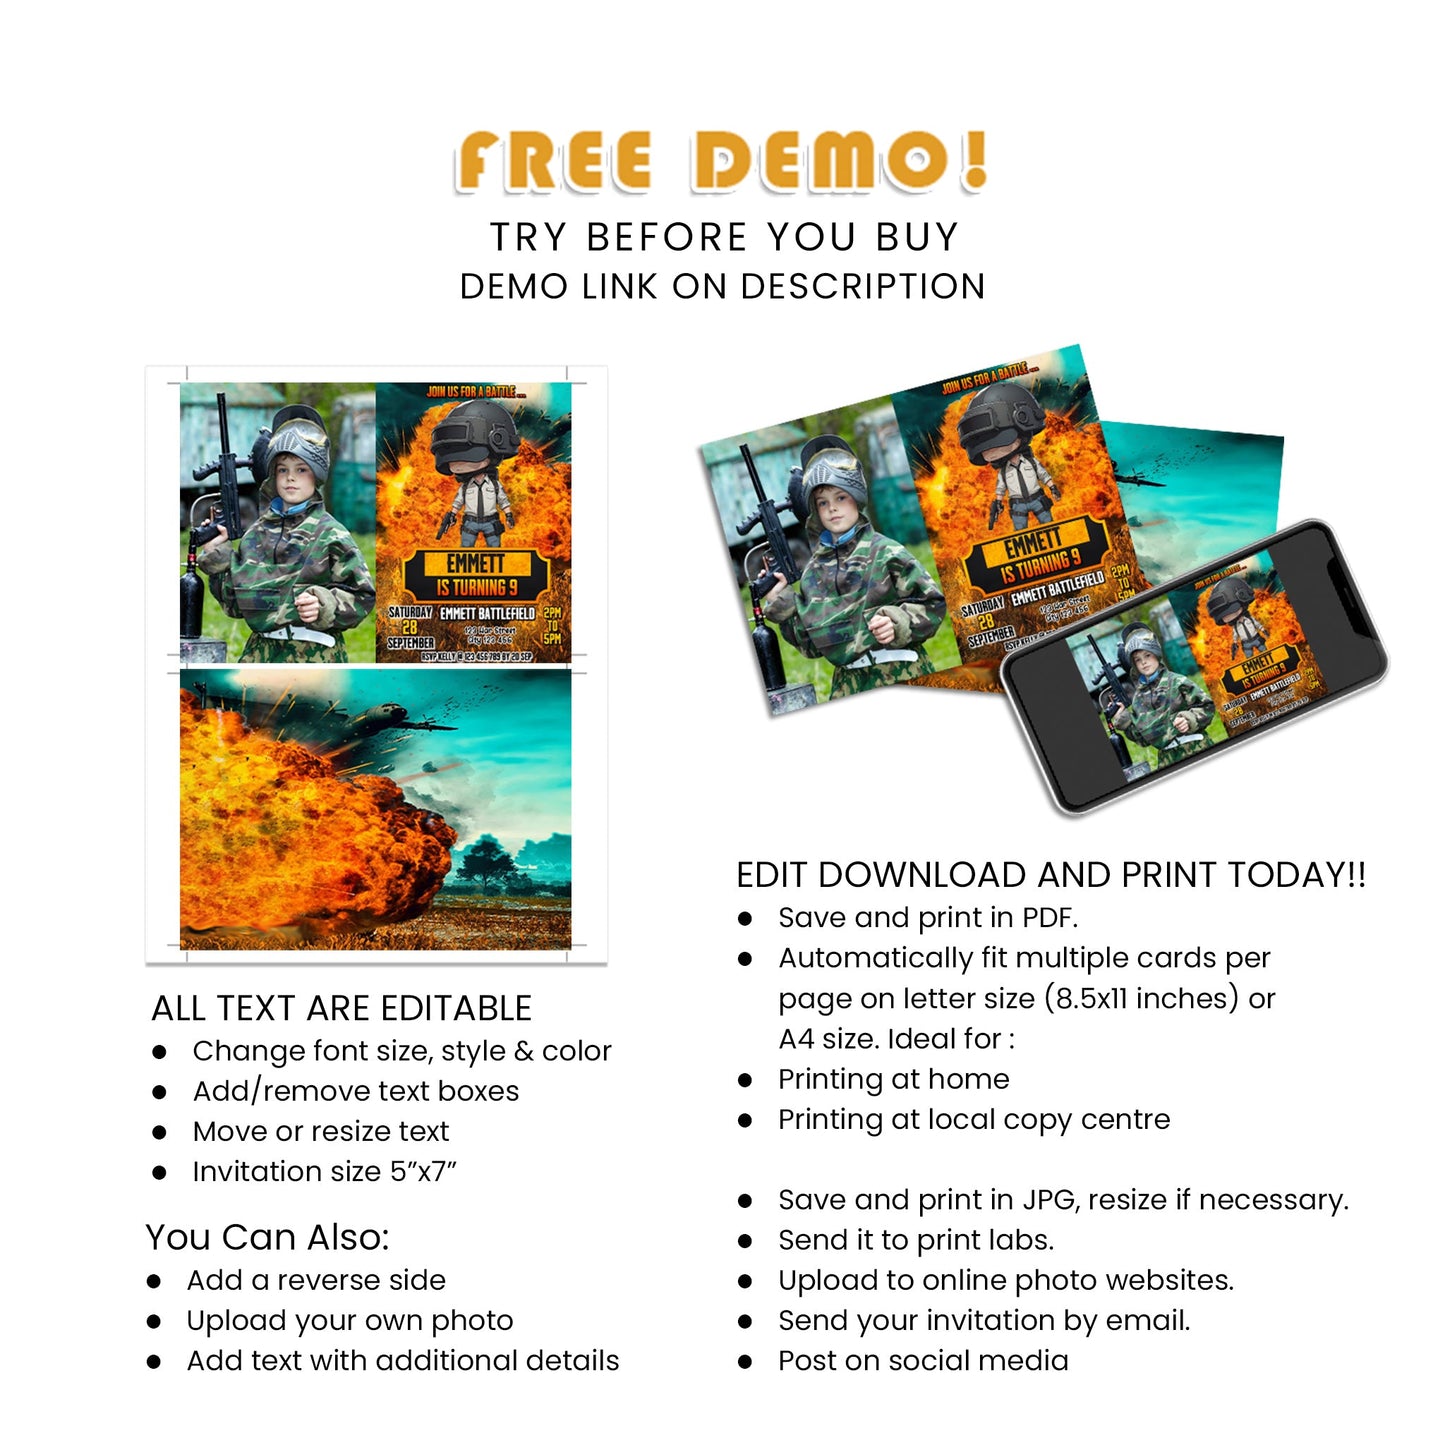 Exclusive PUBG Photo Card Invitations for Elite Party Planning - Make Your Mark